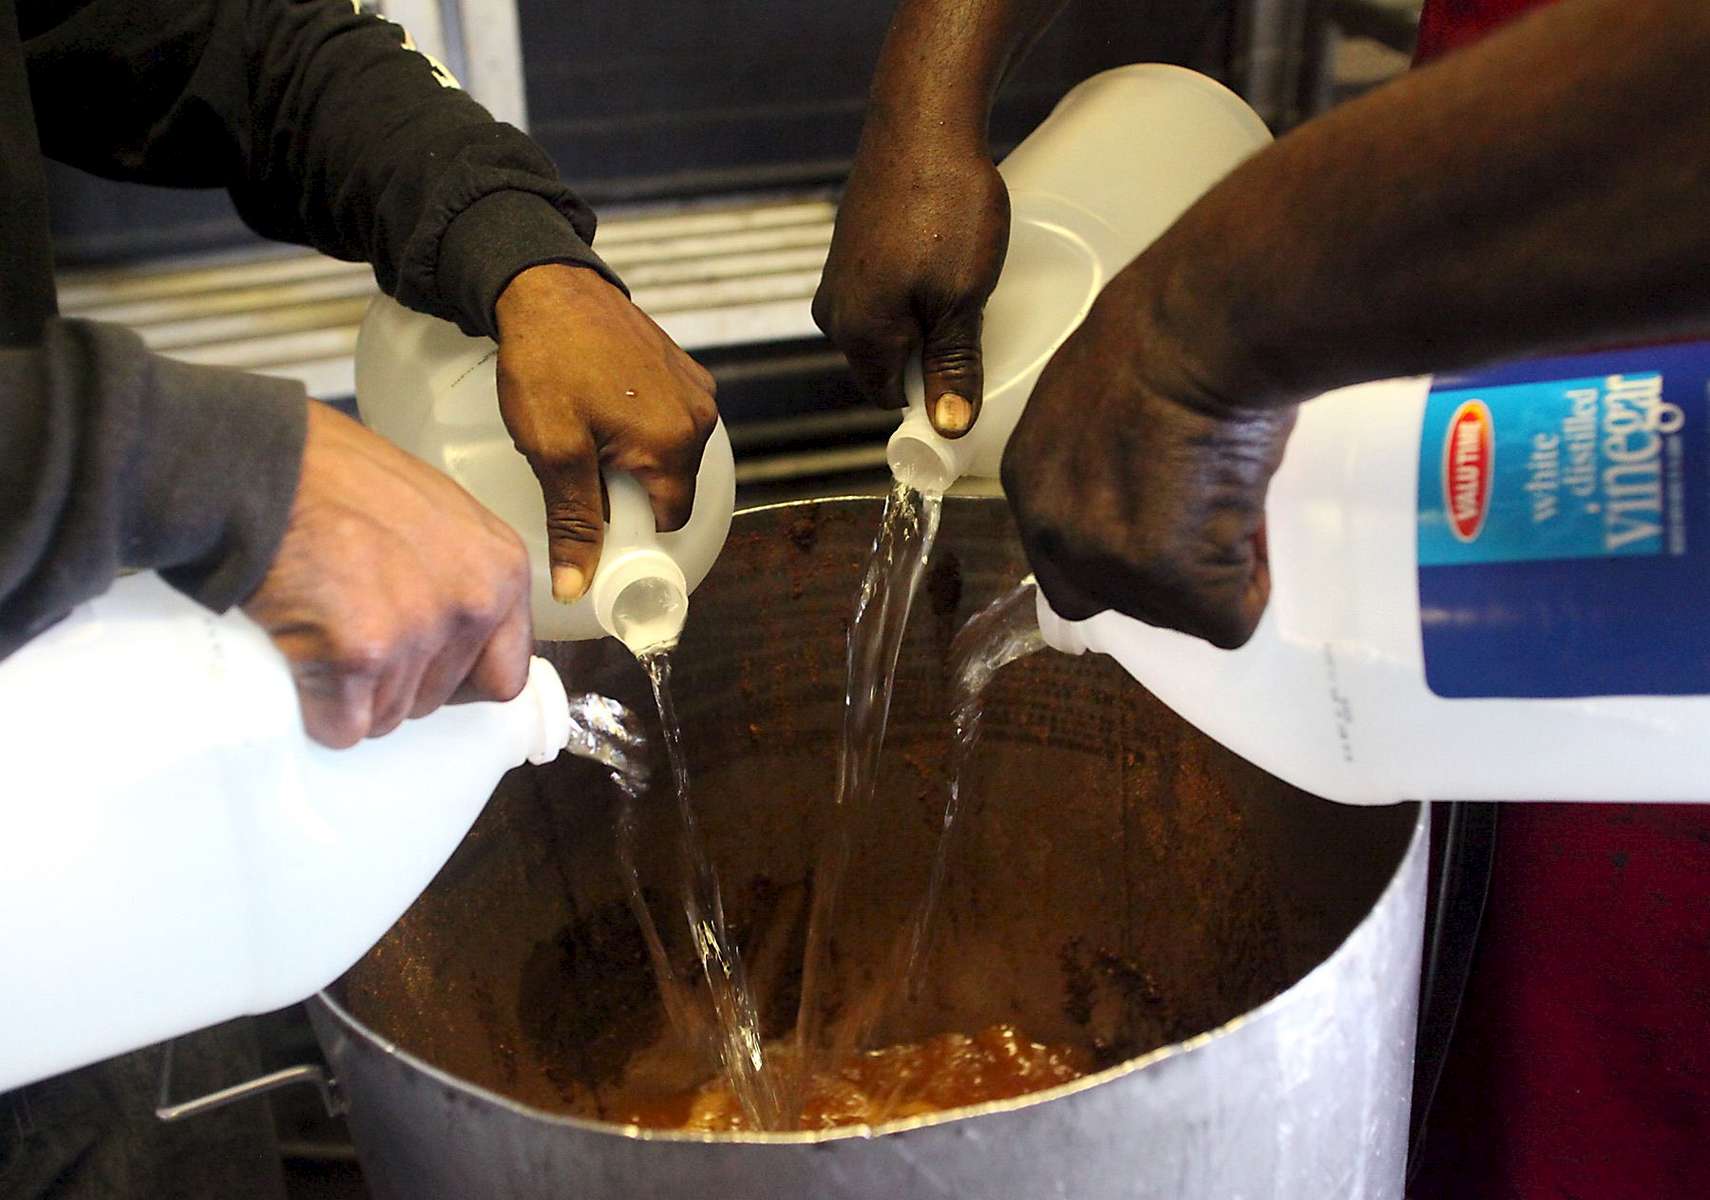 Pit workers Larry Mitchell (left) and Willie Johnson pour vinegar into a large pot at Scott's BBQ in Hemingway, South Carolina, June 21, 2012. The Southern Foodways Alliance and the University of Mississippi’s Center for the Study of Southern Culture made a stop at Scott's BBQ in Hemingway, S.C. to complete the month-long trip to gather and preserve the stories behind South Carolina’s barbecue culture during their ongoing documentary project, The Southern BBQ Trail. According to food historian Rien Fertel and photographer Denny Culbert, who are conducting the study, there are only ten or 15 BBQ pits in the whole South that use the old-timey methods of fire coal pit cooked BBQ they use at Scott's.  REUTERS/Randall Hill  (UNITED STATES)